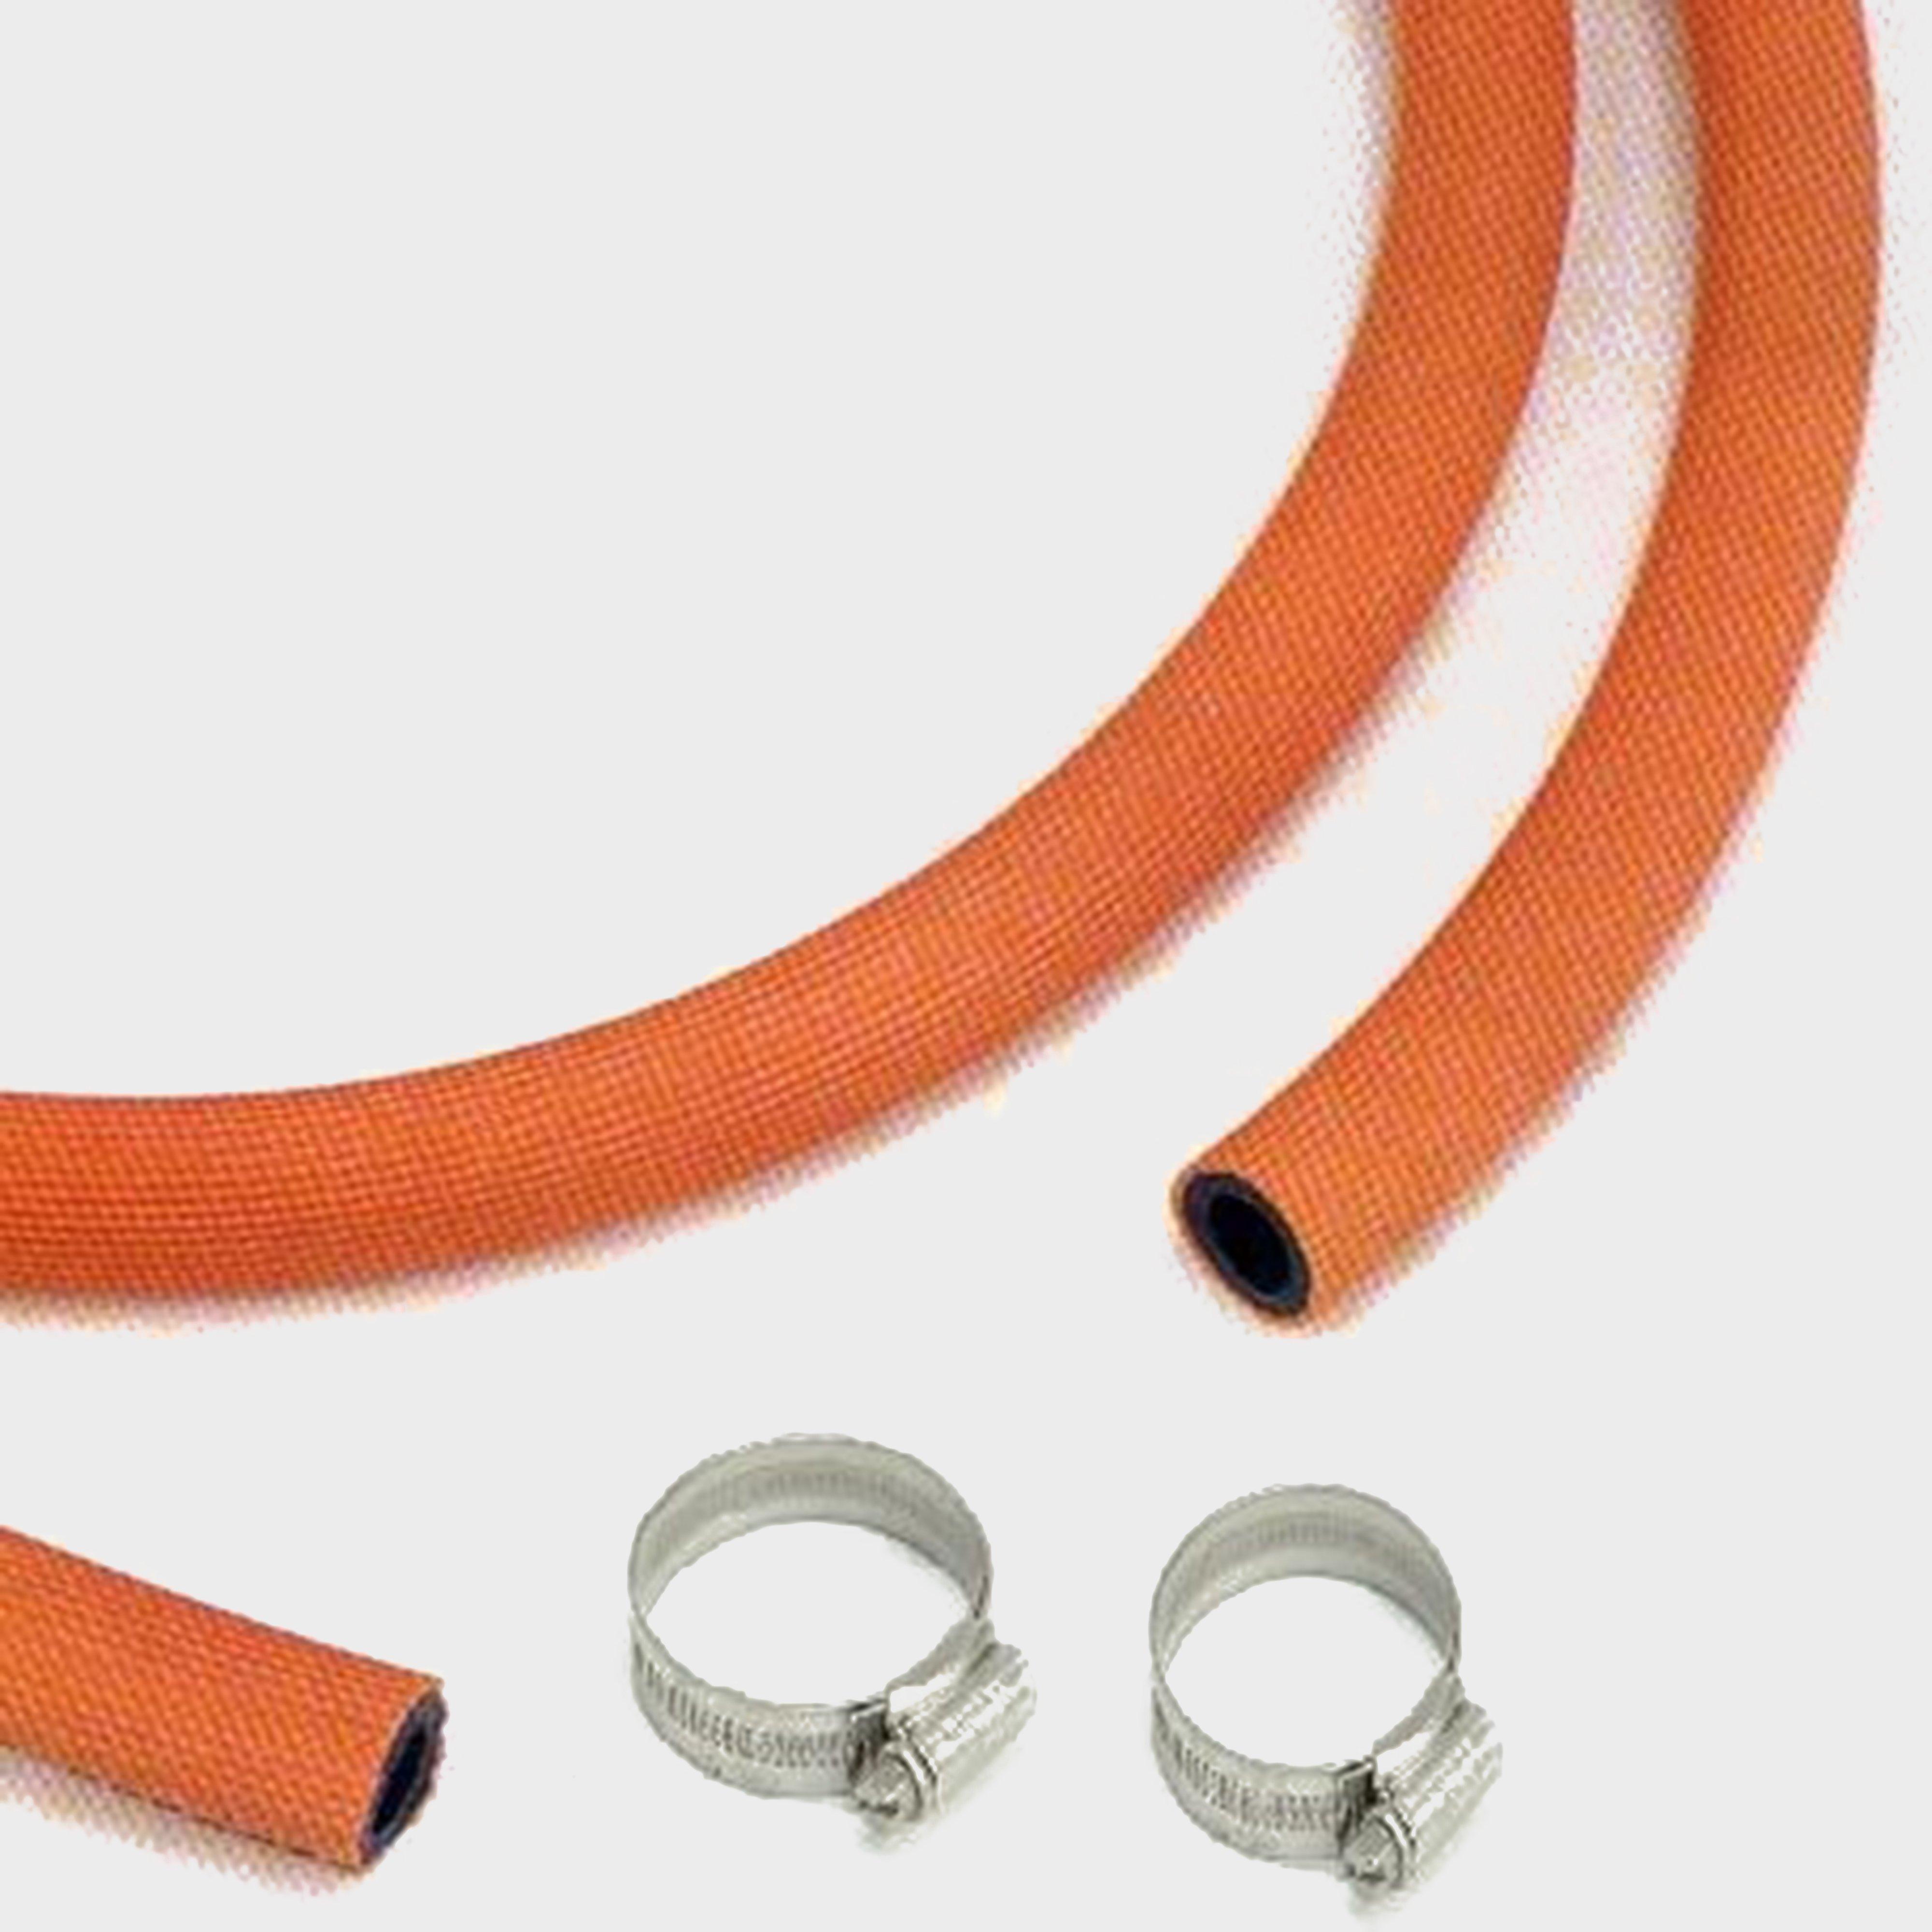 Continental Gas Hose & Two Clips, Brown